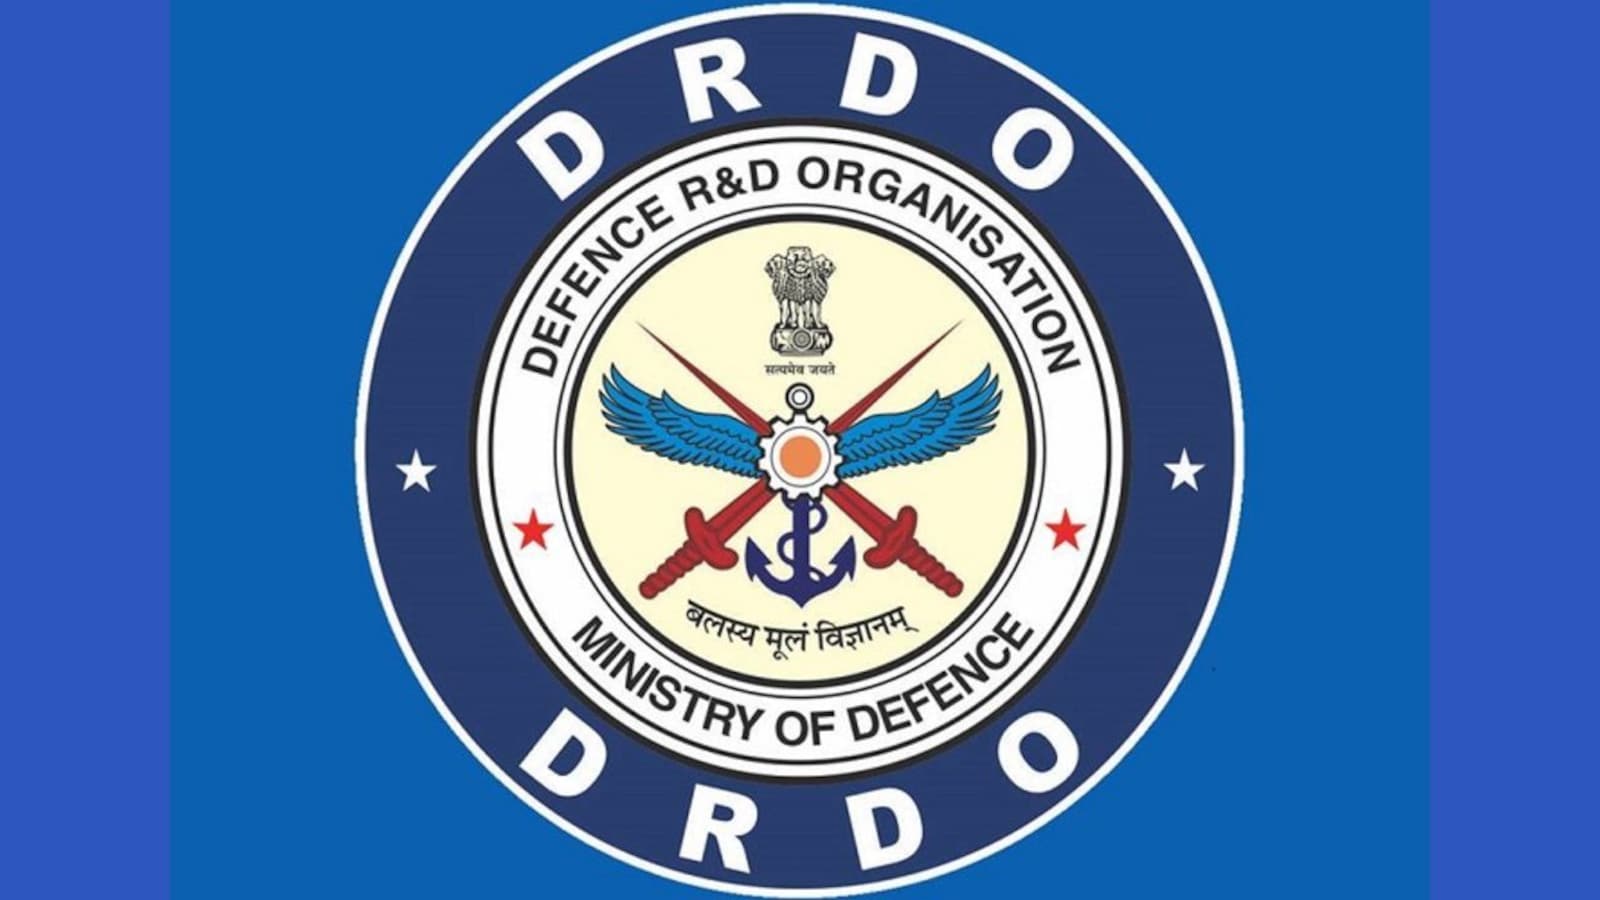 DRDO has signed 1,464 technology transfer agreements with Indian companies till date: Government